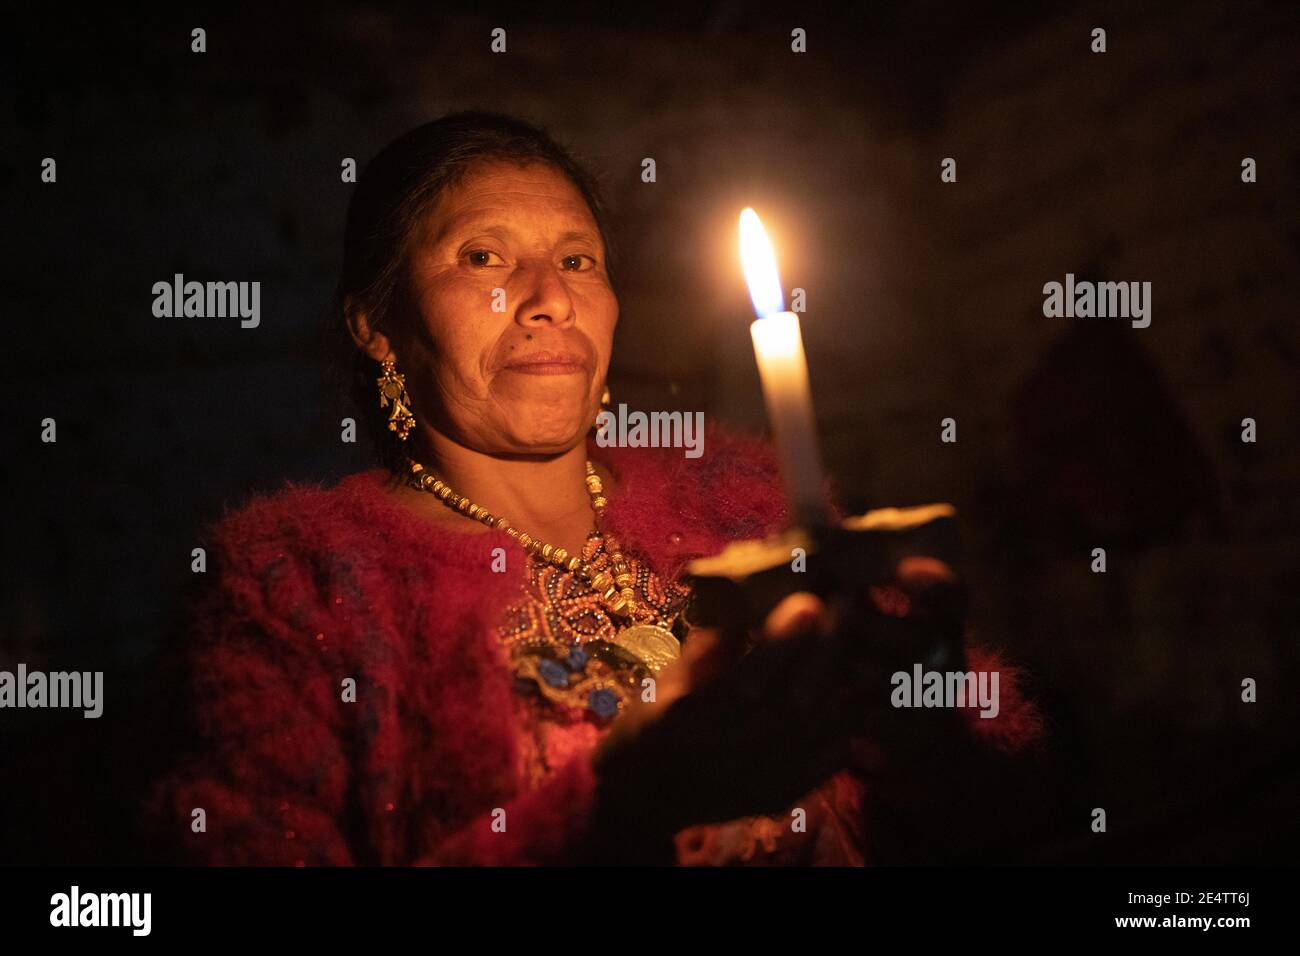 A woman uses a candle as a light source at her home in Cantel, Guatemala, Central America. Stock Photo